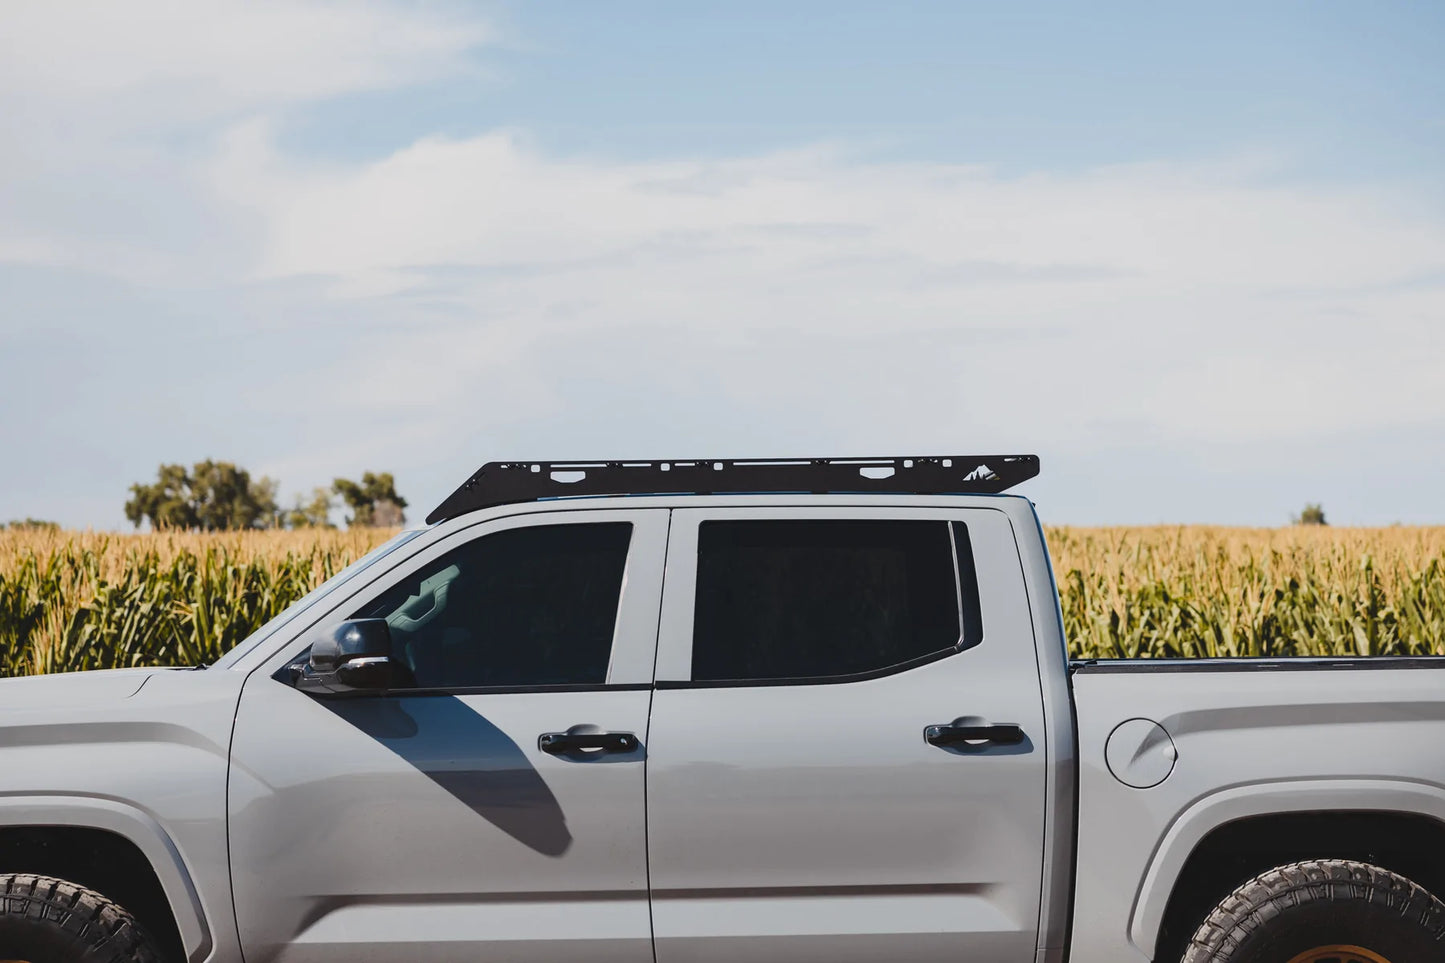 THE GRIZZLY (2022 TUNDRA CREWMAX ROOF RACK)